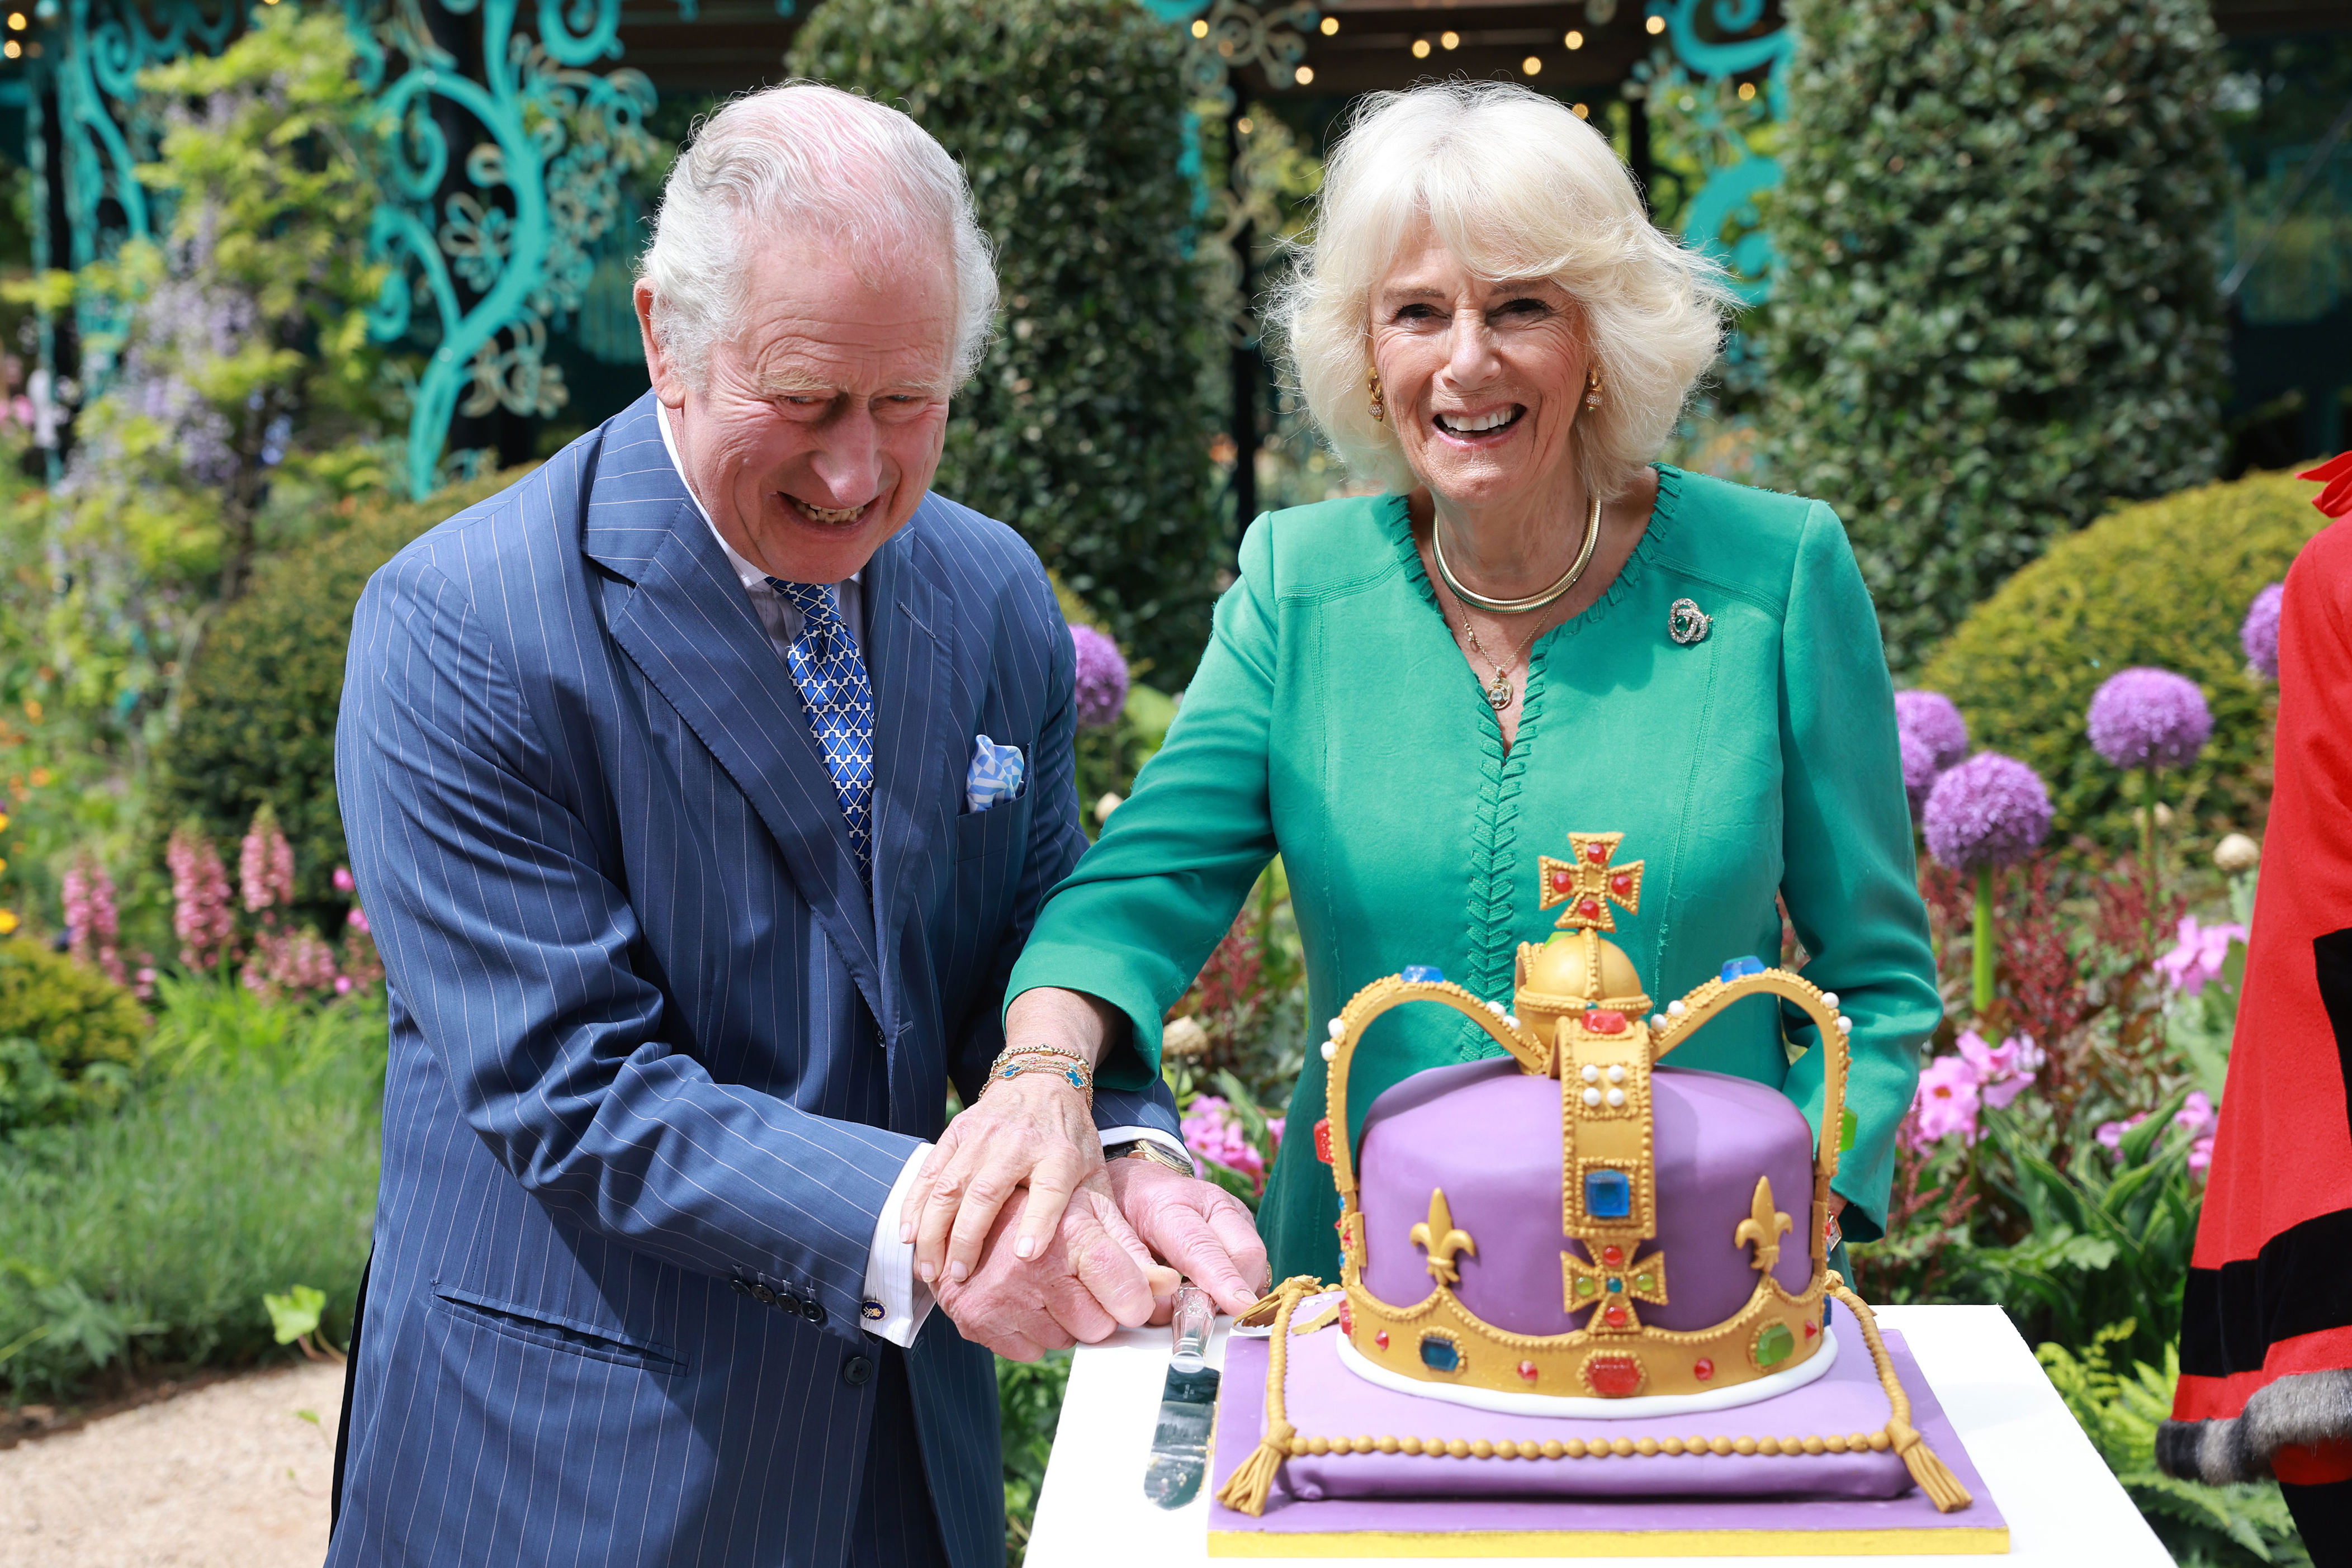 <p>King Charles III and Queen Camilla laughed as they cut a crown-shaped cake during a visit to open the new Coronation Garden in Newtownabbey, Northern Ireland, on day one of their two-day visit to the British nation on May 24, 2023 -- their first since their recent <a href="https://www.wonderwall.com/celebrity/the-coronation-of-king-charles-iii-and-queen-camilla-the-best-pictures-of-all-the-royals-at-this-historic-event-735015.gallery">coronation</a>.</p>